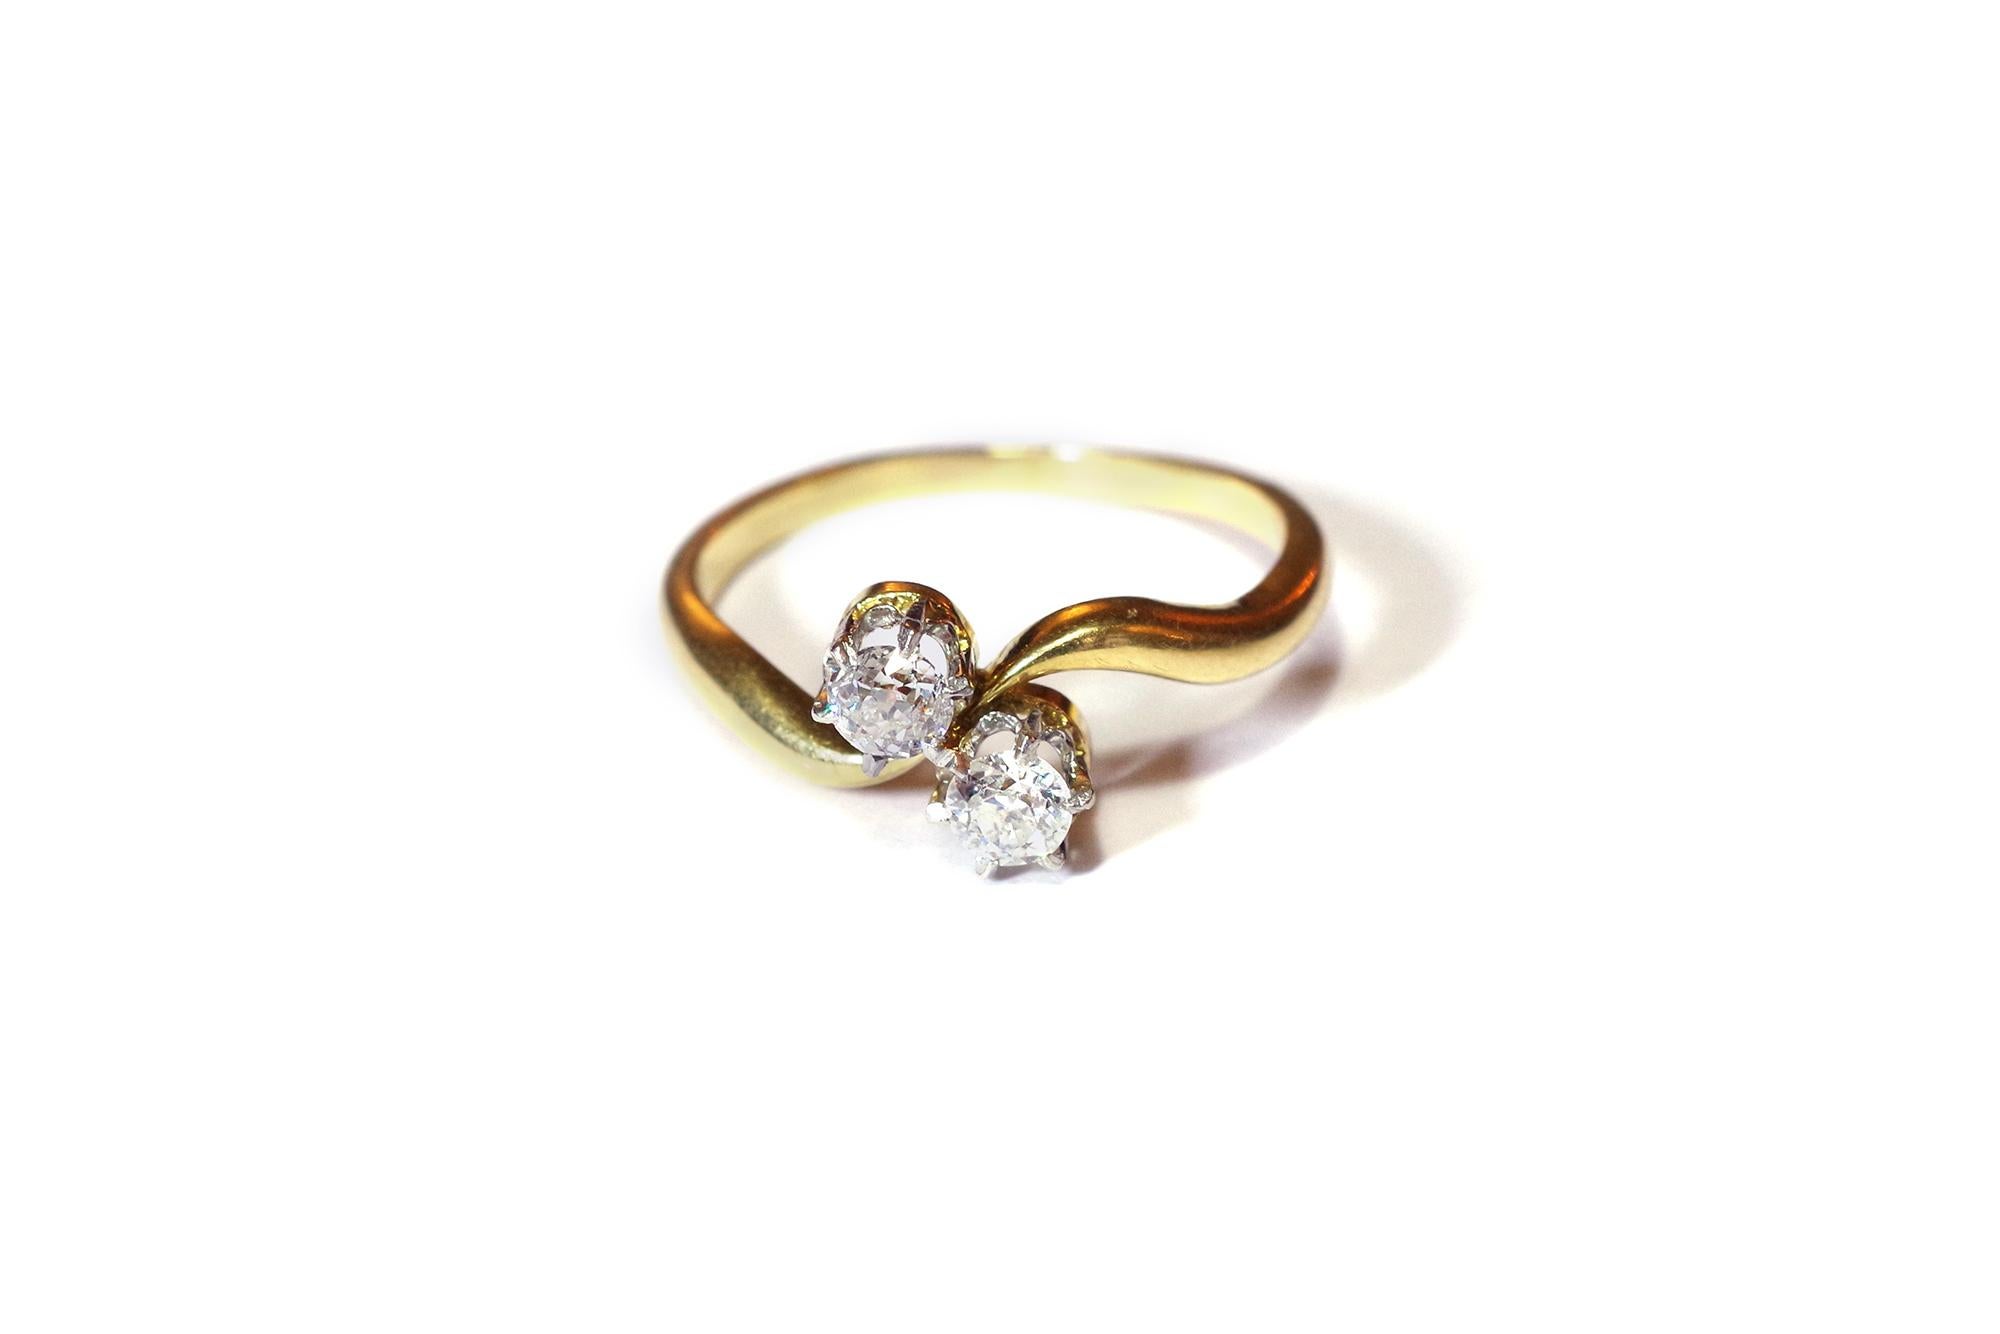 Antique You and Me ring in yellow gold 18 karats and platinum. The ring is centred by an old cut diamond and a brilliant cut diamond set by six claws in platinum. French antique ring, circa 1900.

Marked with a horse's head (1838-1919) and numbered